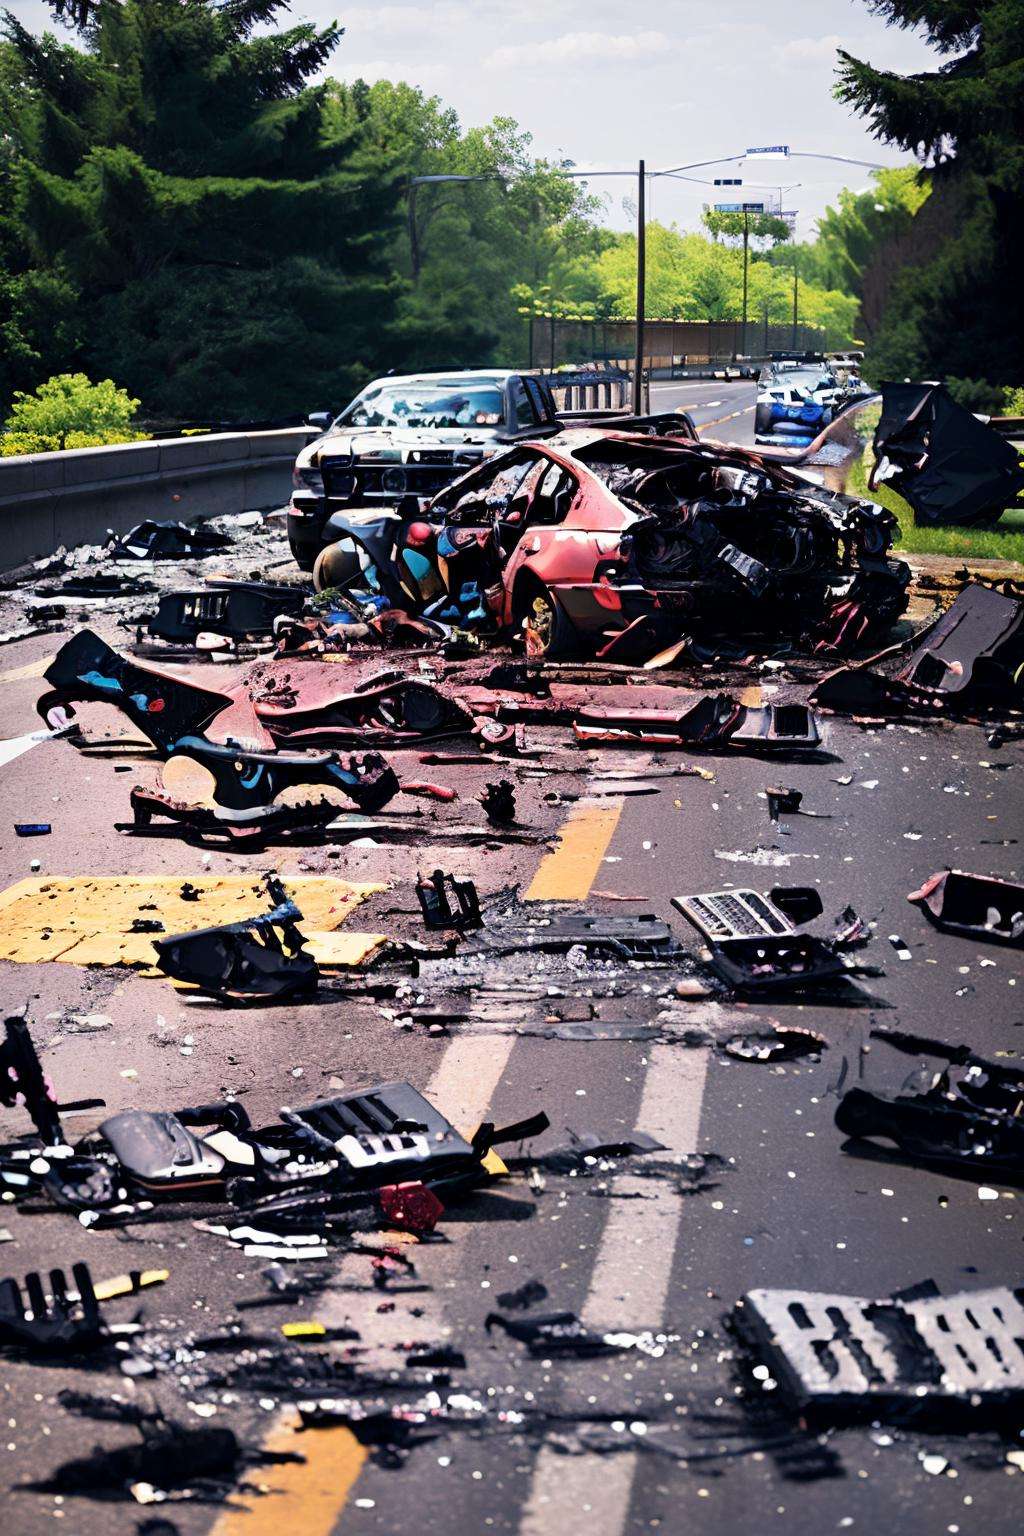 The collision site is marked by broken glass and dented metal, capturing the aftermath of the crash and the resulting wreckage:1.5, collision site:1.2, marked by:1.2, broken glass:1.1, dented metal:1.1, capturing:1.0, aftermath of the crash:1.1, resulting wreckage:1.1. , RoadWreck_Simulator